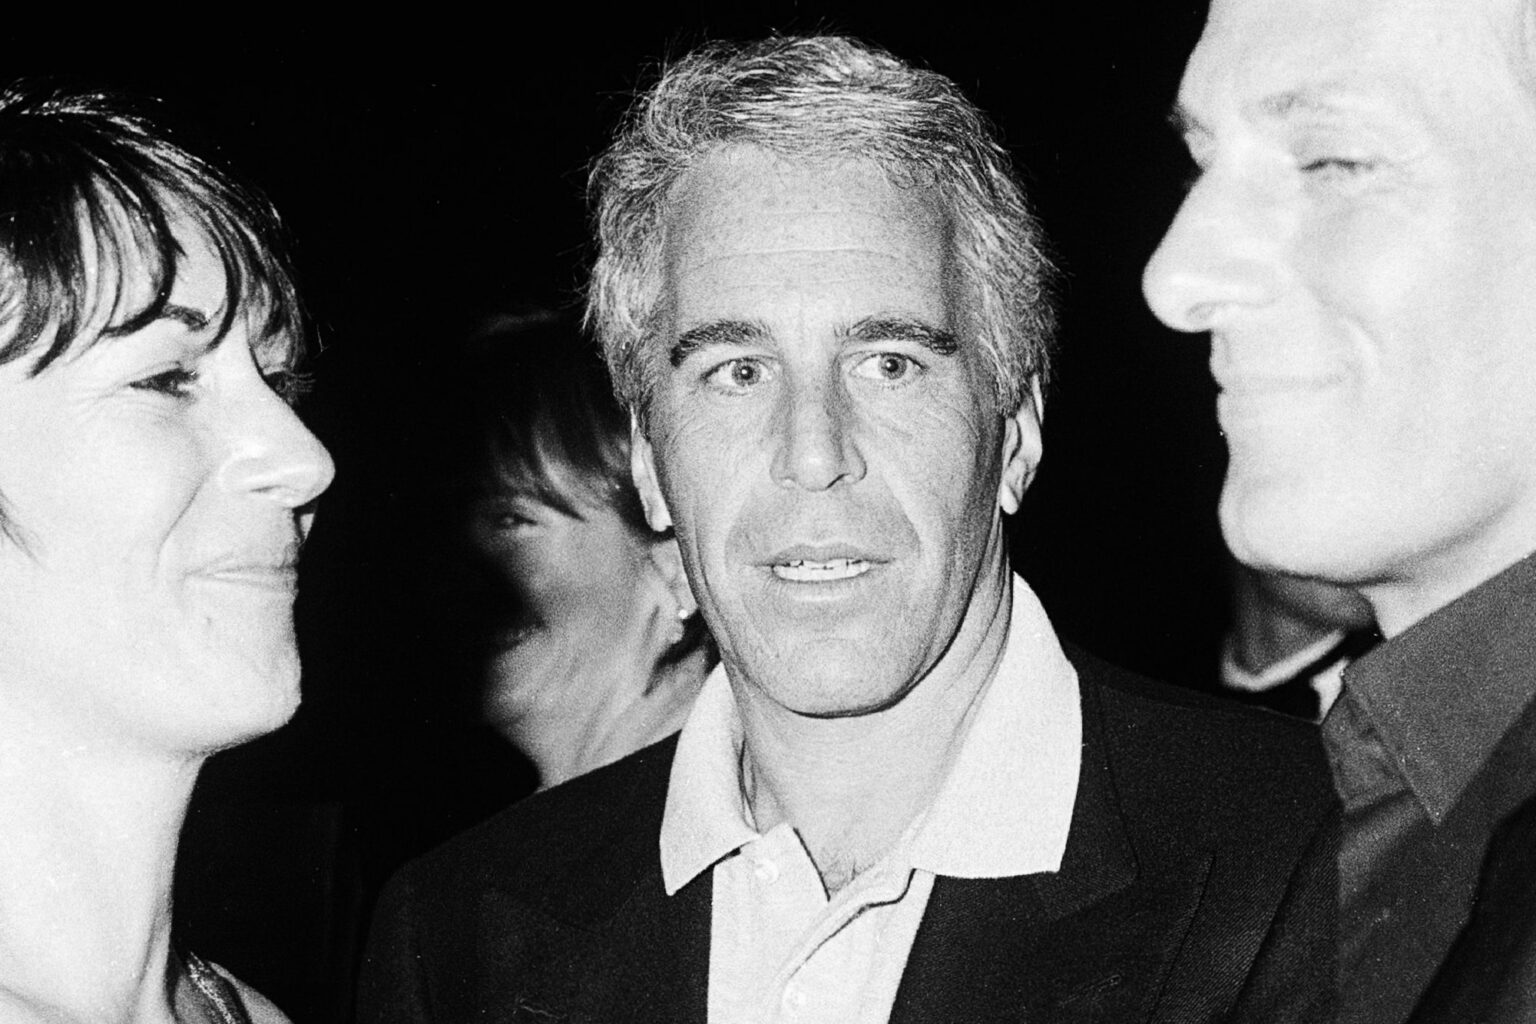 A new lawsuit has been brought forward against the estate of financier Jeffrey Epstein. Here's a look into the latest news surrounding Epstein.